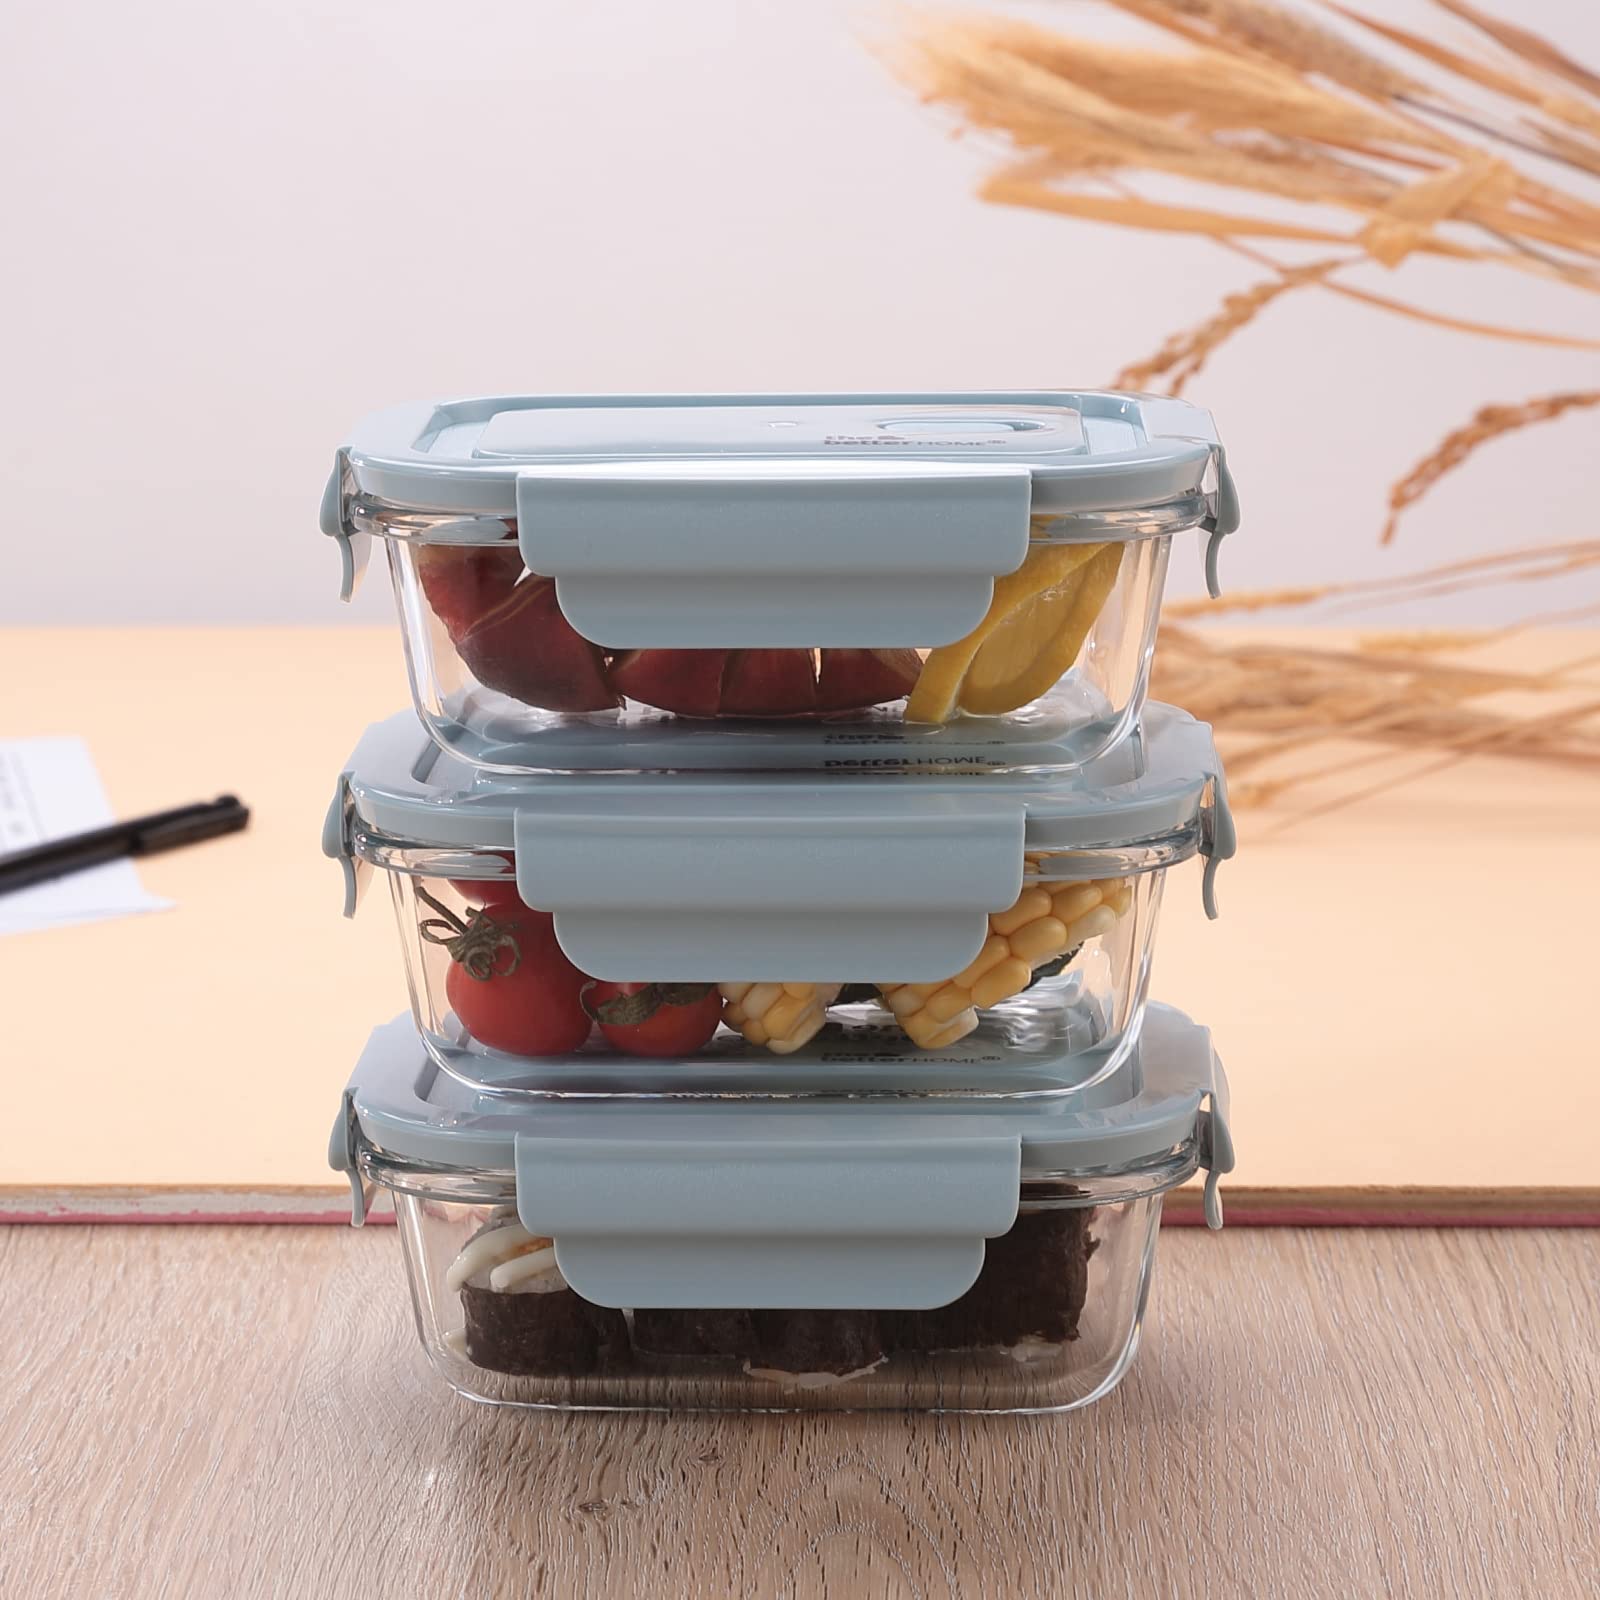 Lunch Collection Food Storage Containers with Airtight Lids Blue